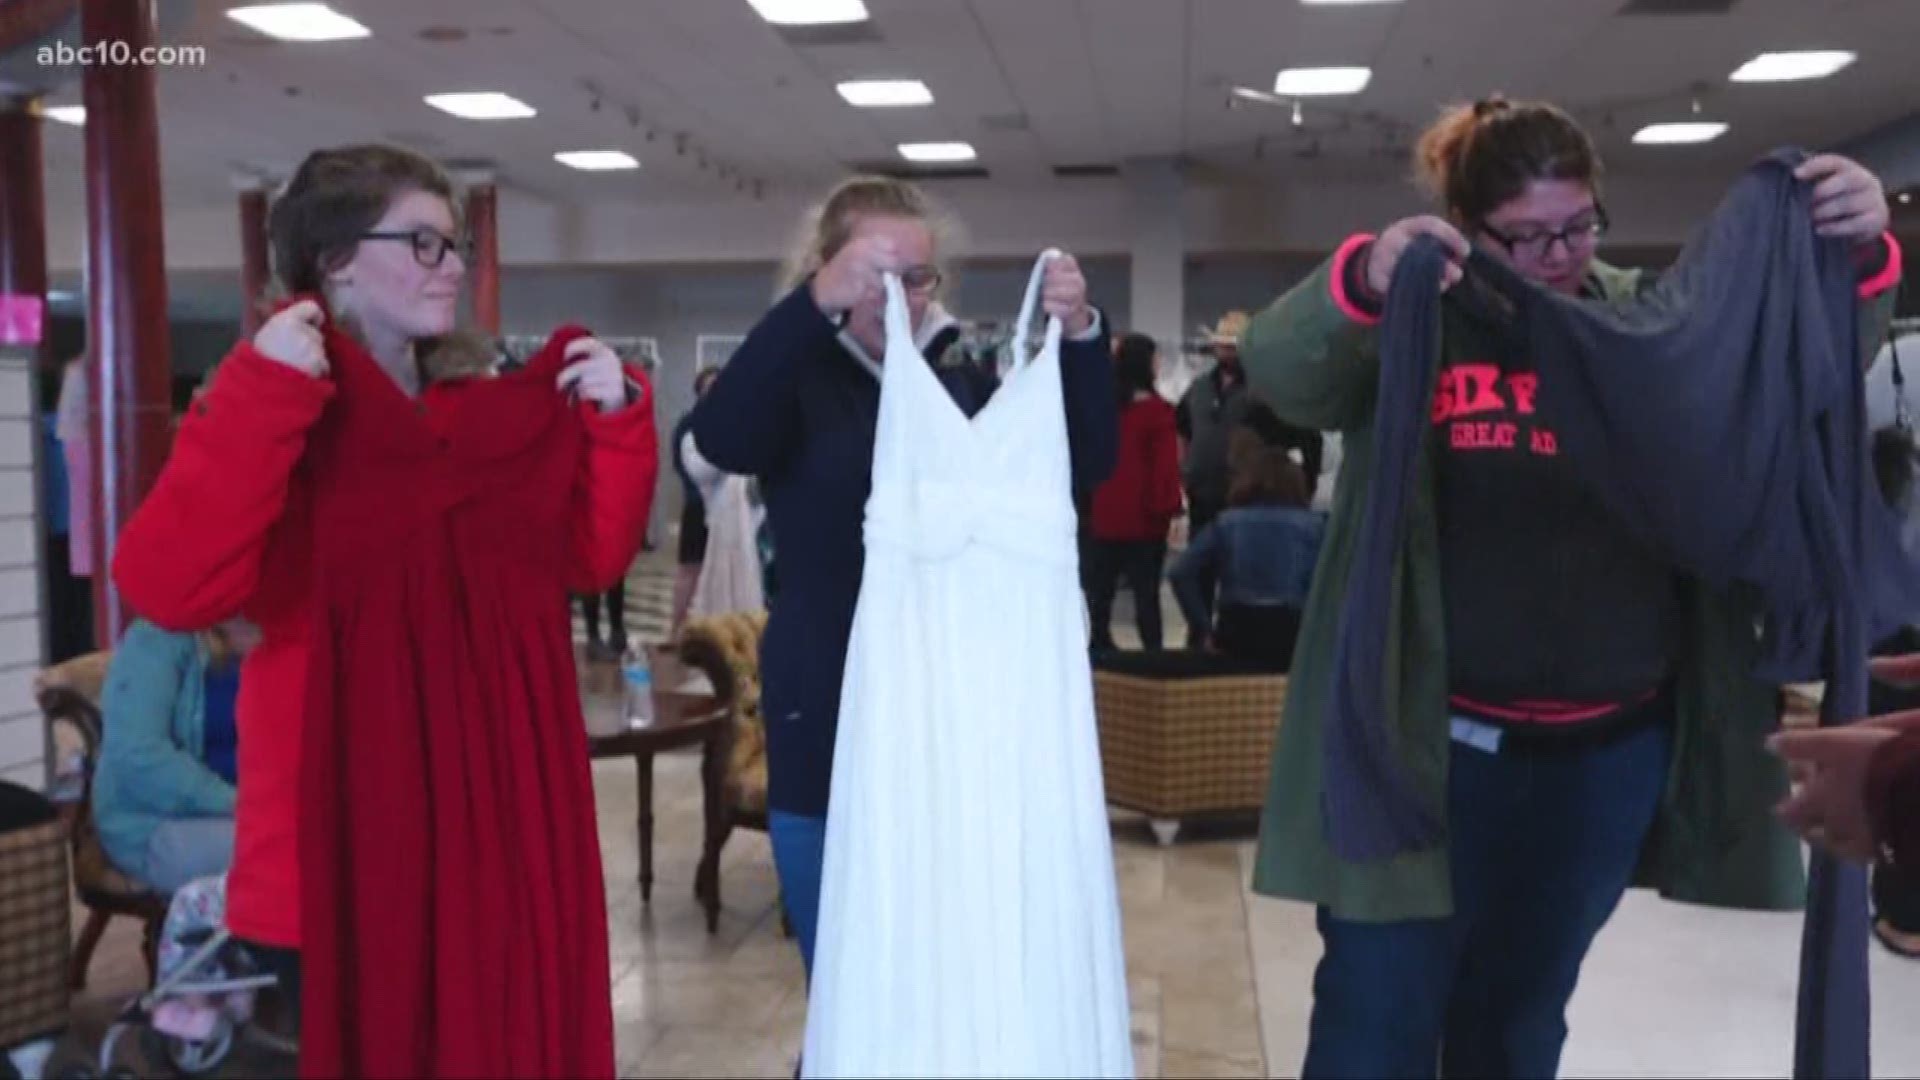 After its warehouse burnt in the Camp Fire, a nonprofit in Butte County needed a place to donate hundreds of new dresses and gowns, so it reached out to the Vida de Oro Foundation in Sacramento.